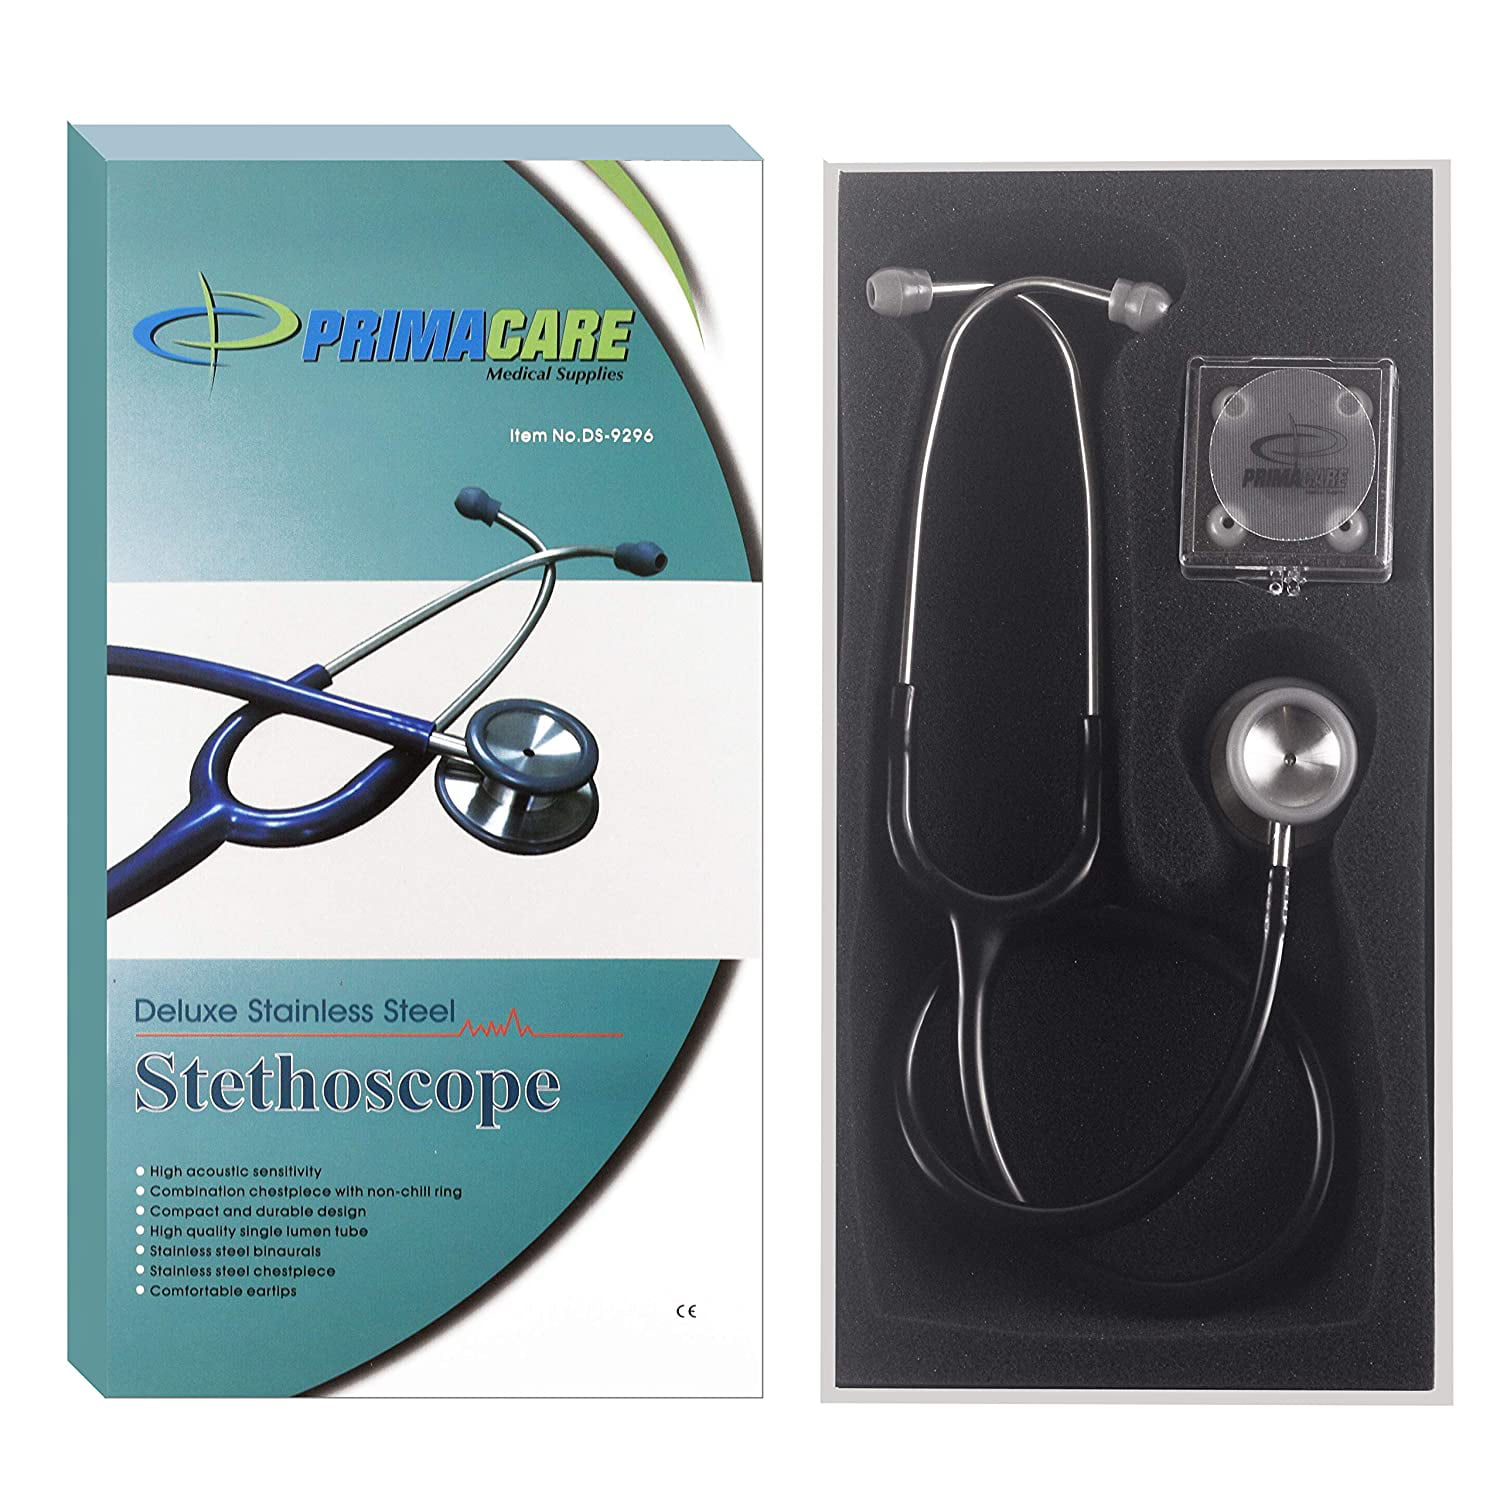 Primacare Stainless Steel Classic Stethoscope